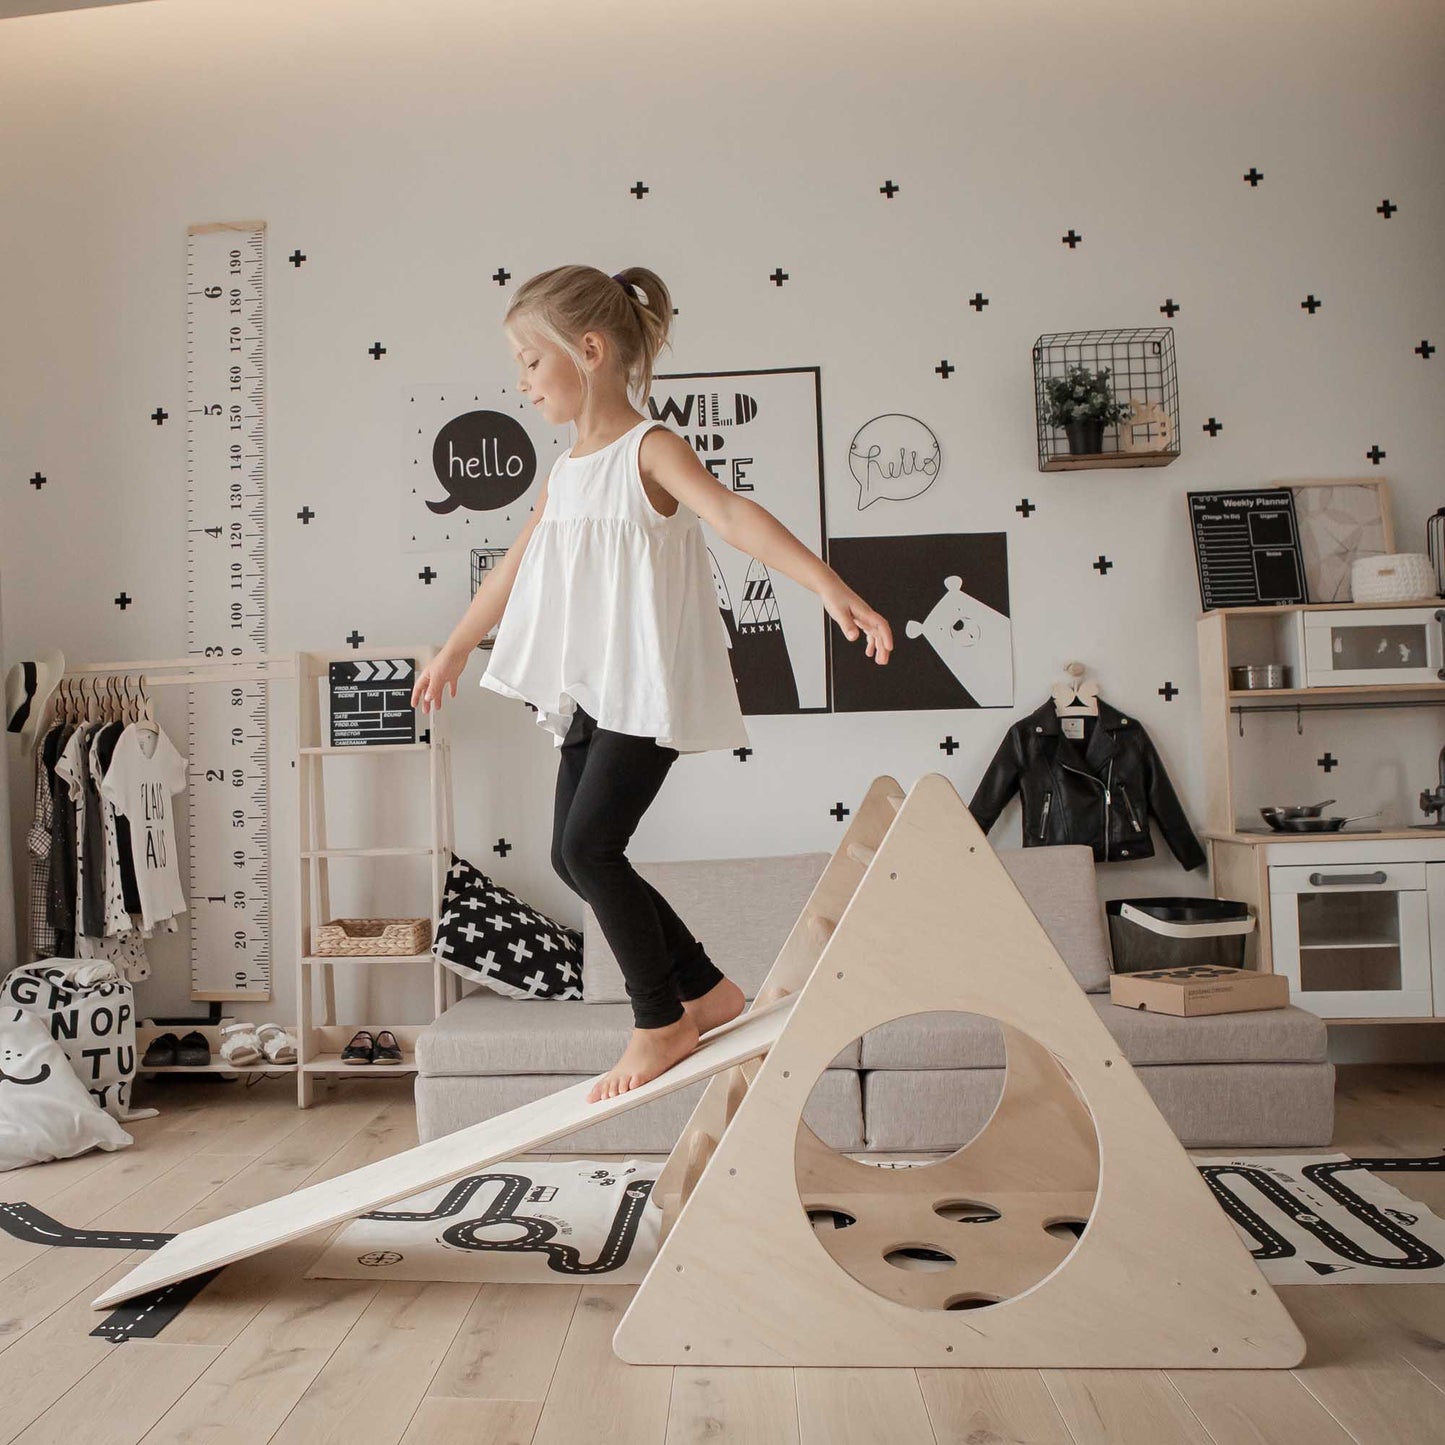 A little girl is playing with a Climbing triangle + Transformable climbing gym + a ramp in her living room. She is engaging with a sensory panel on the Climbing triangle + Transformable climbing gym + a ramp.